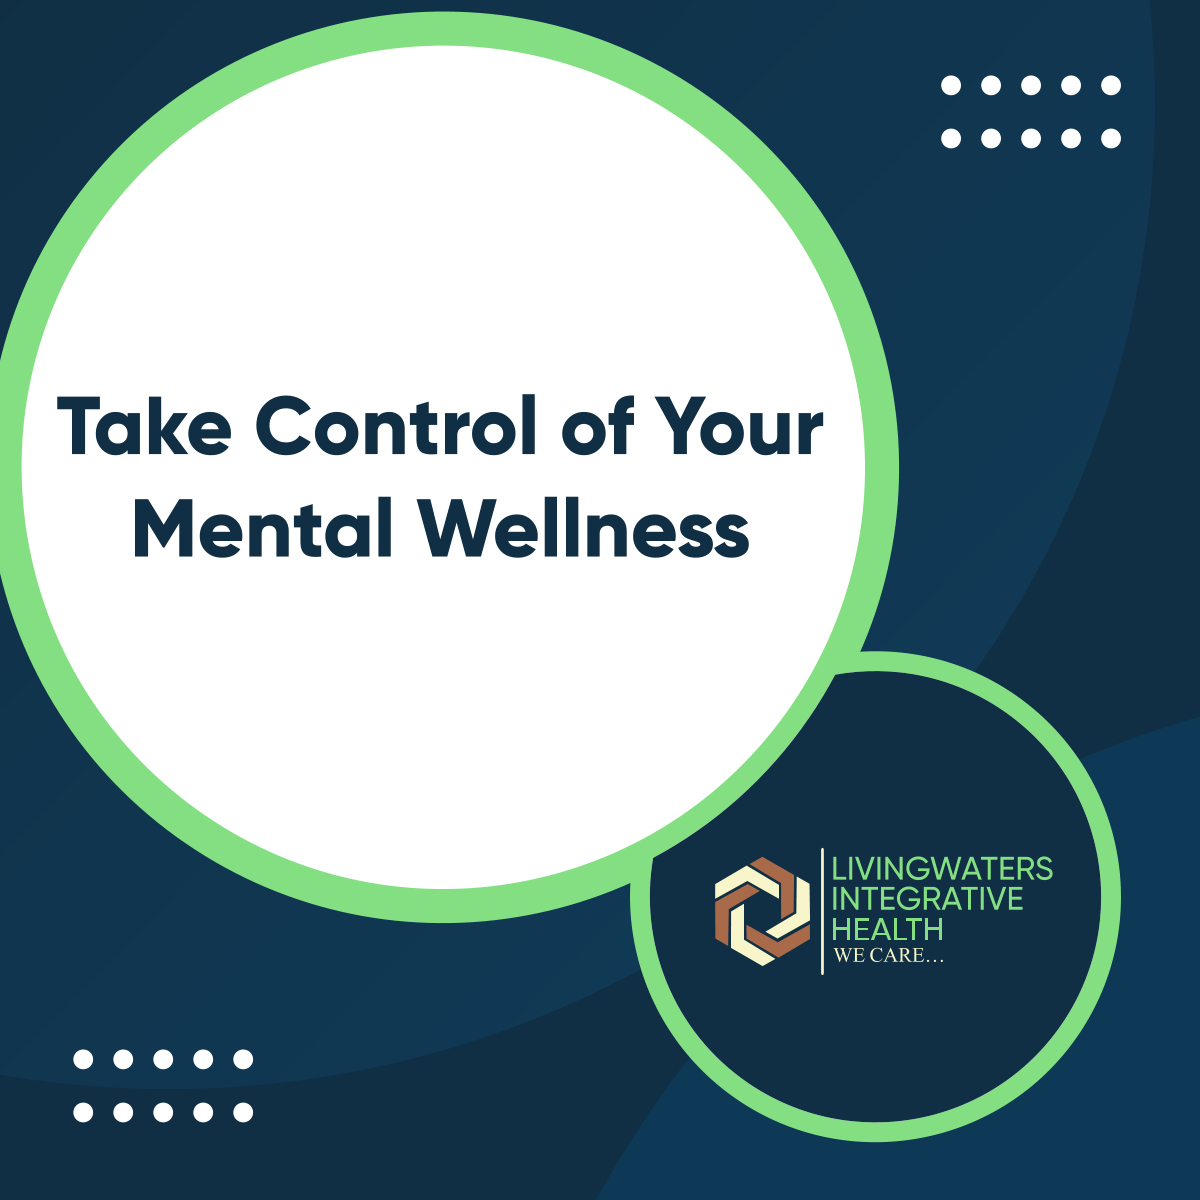 Our mental health affects everything we do in our life. The skills and expertise of mental health practitioners may be what you need to take control of your mental wellness.

We can help you manage your mental health!

#MentalHealthManagement #BehavioralHealthCare